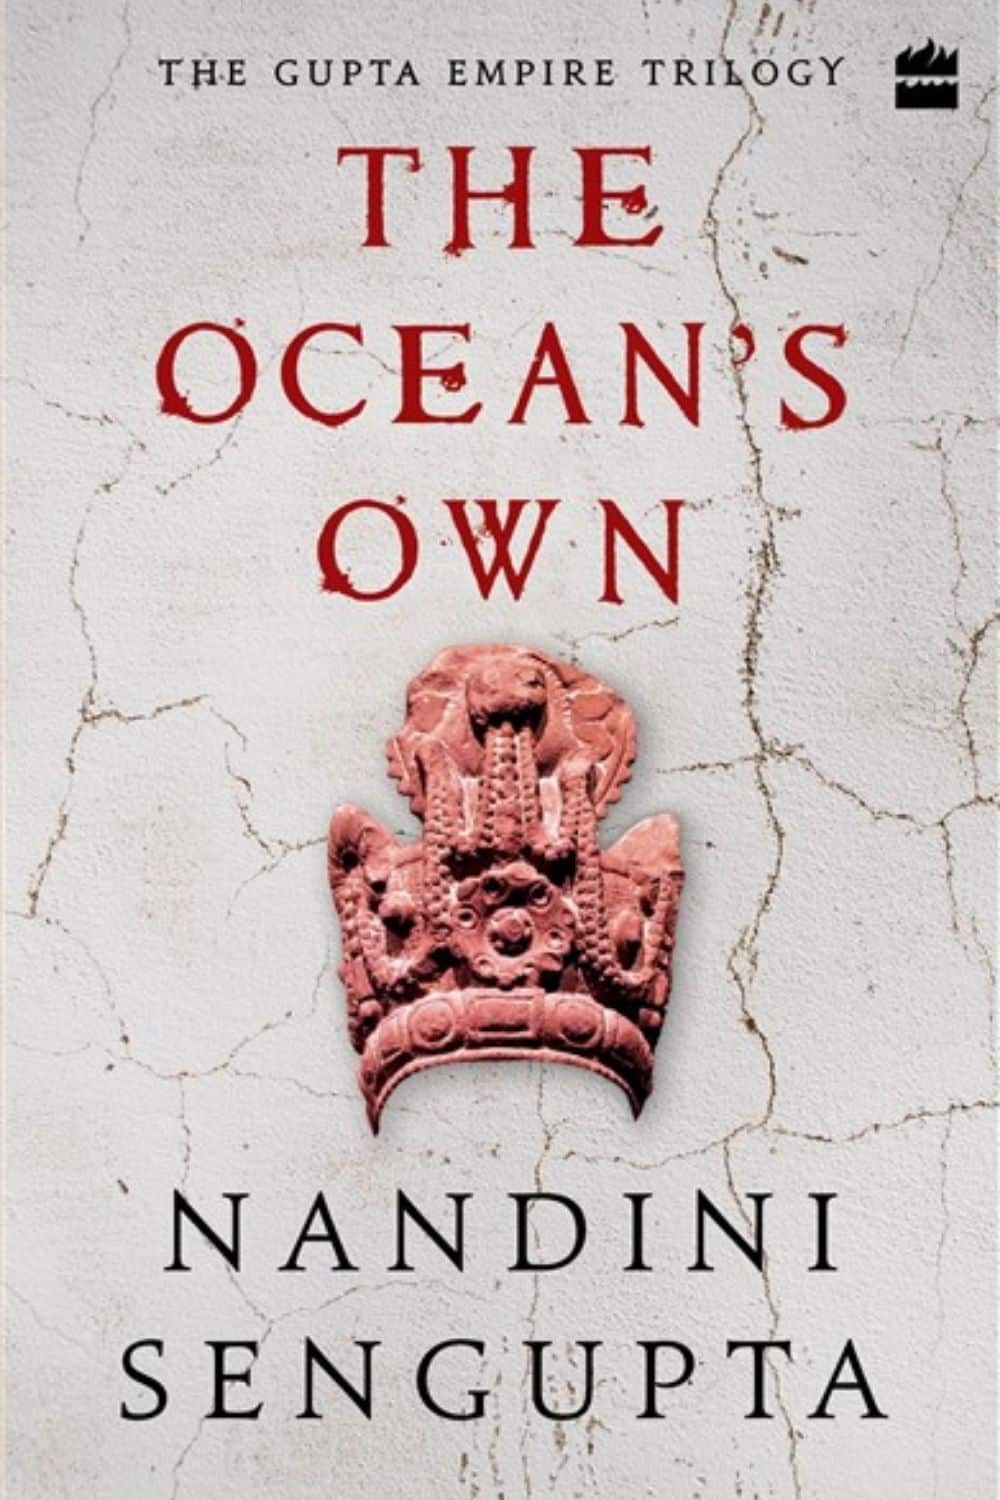 Top 10 Books By Indian Authors In June 2021 (The Ocean’s Own by Nandini Sengupta)